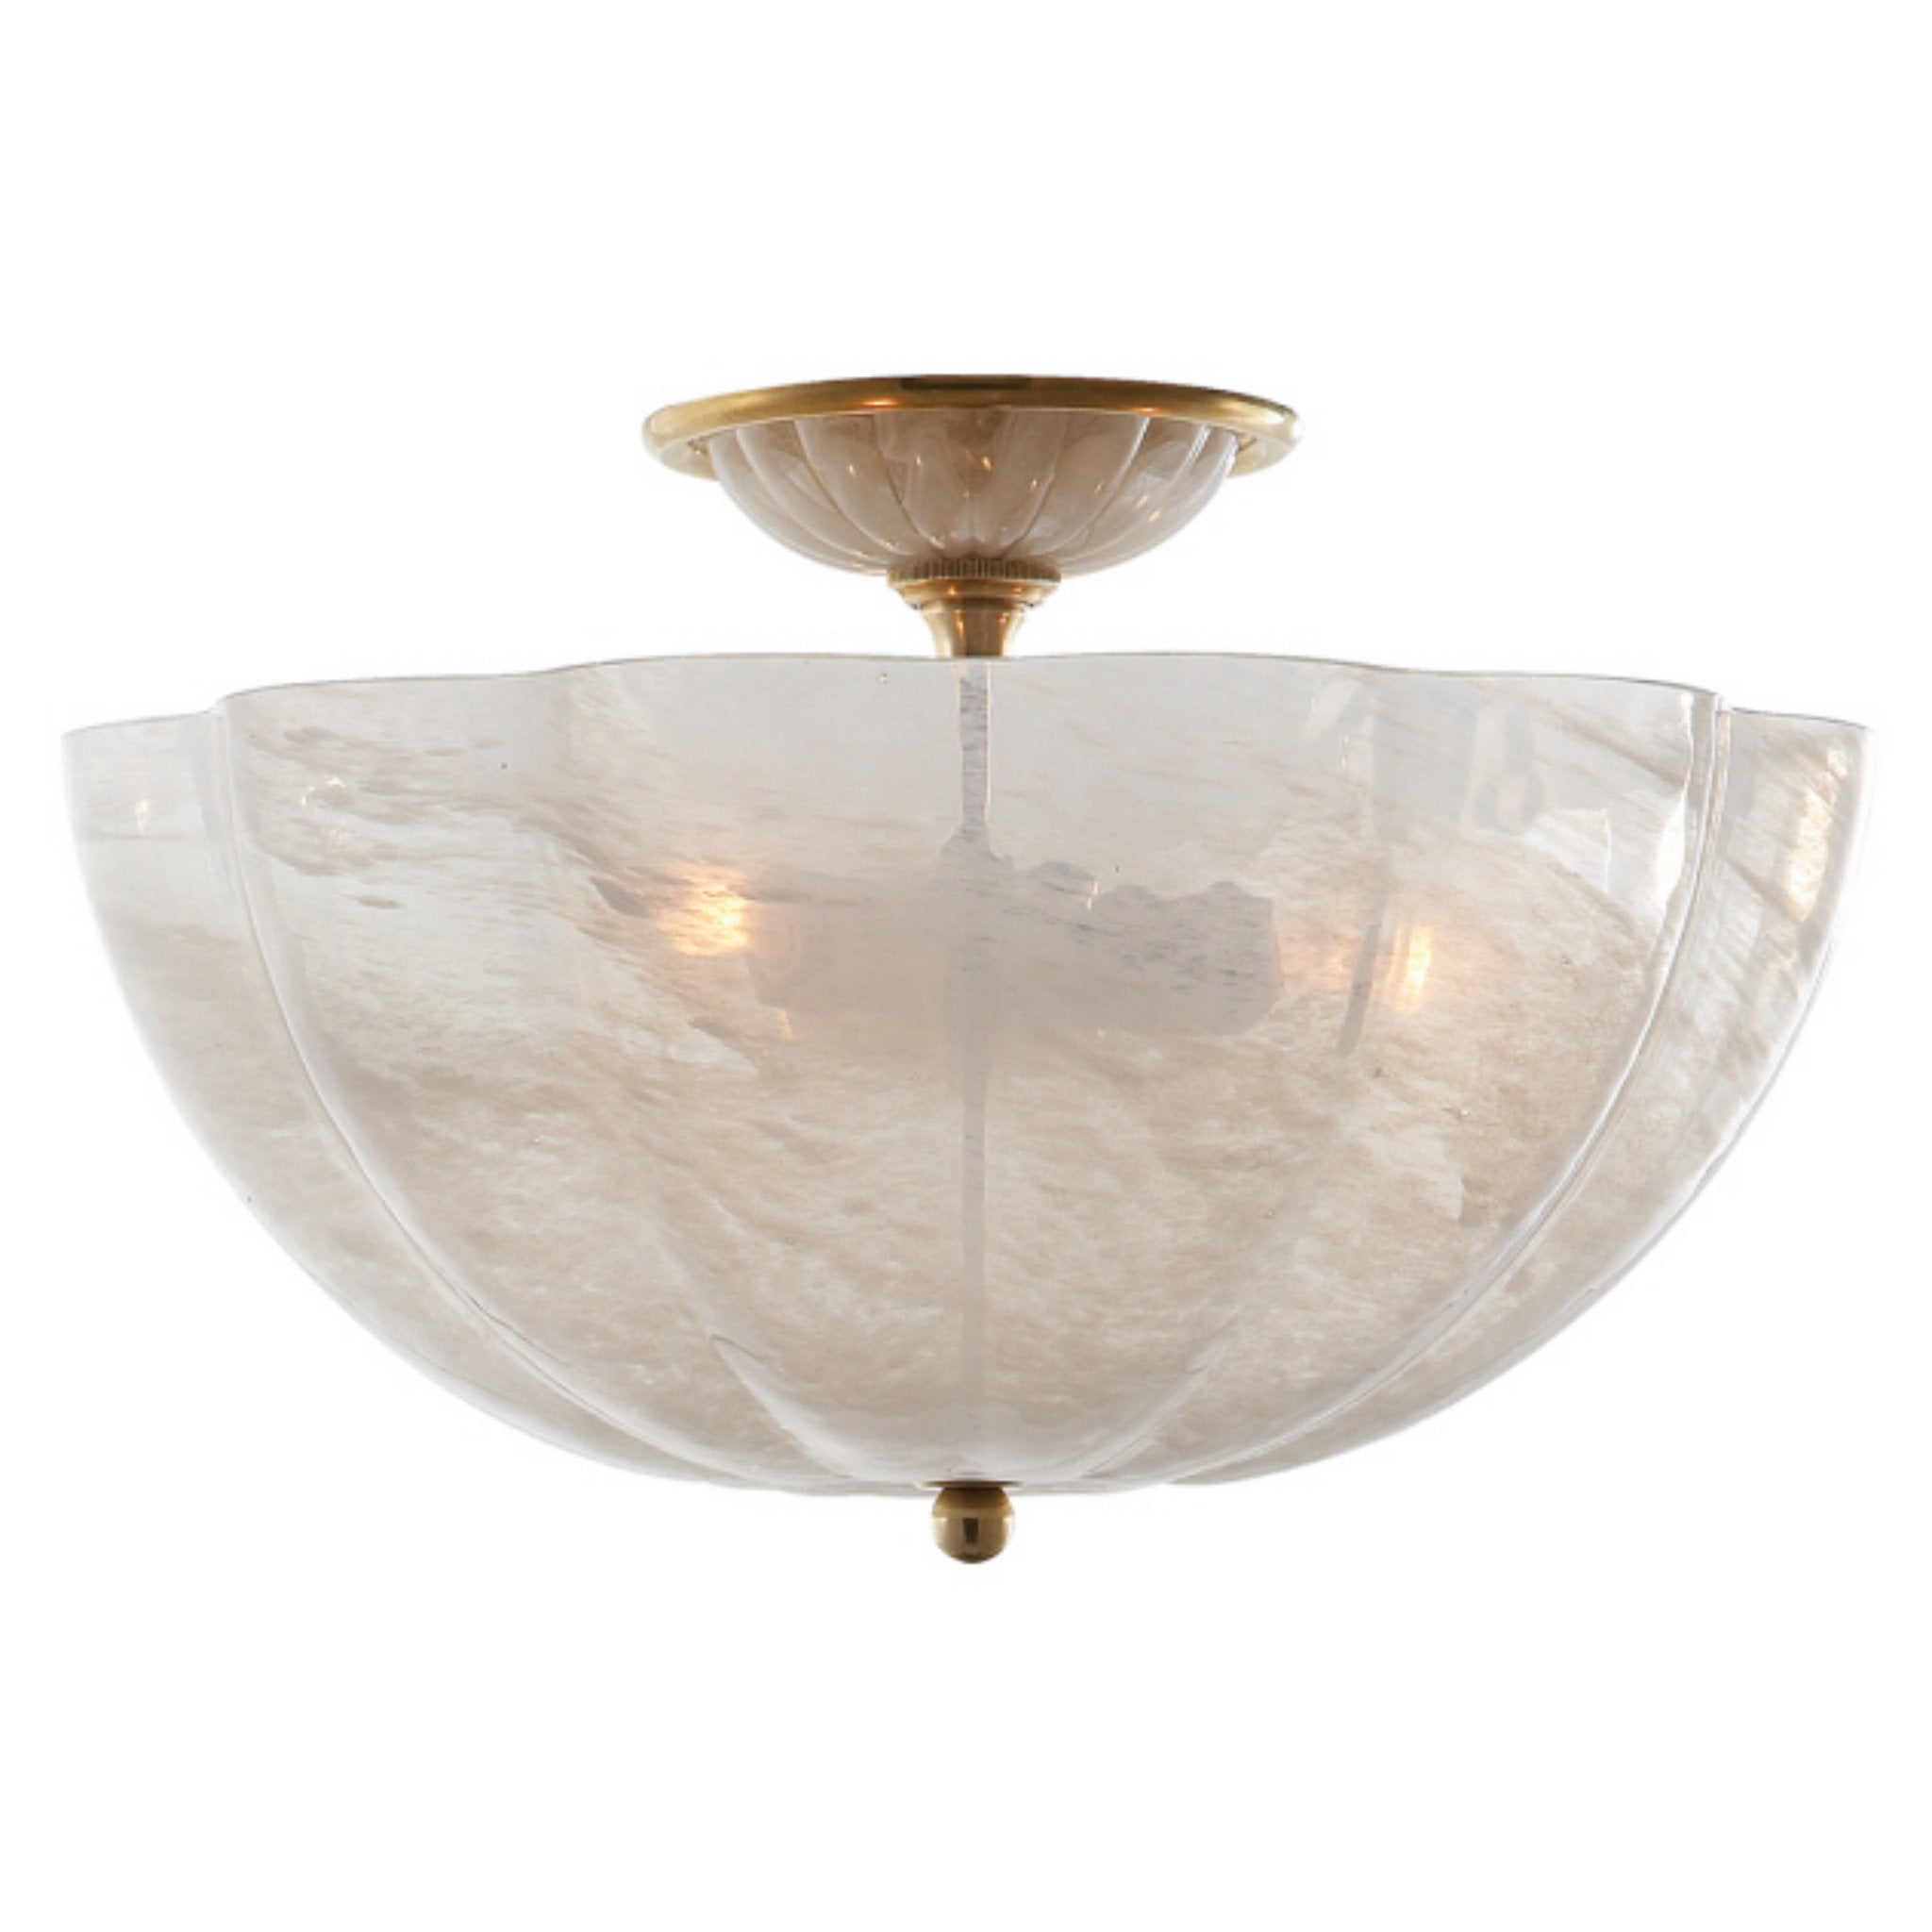 AERIN Rosehill Semi-Flush in Hand-Rubbed Antique Brass with White Strie Glass